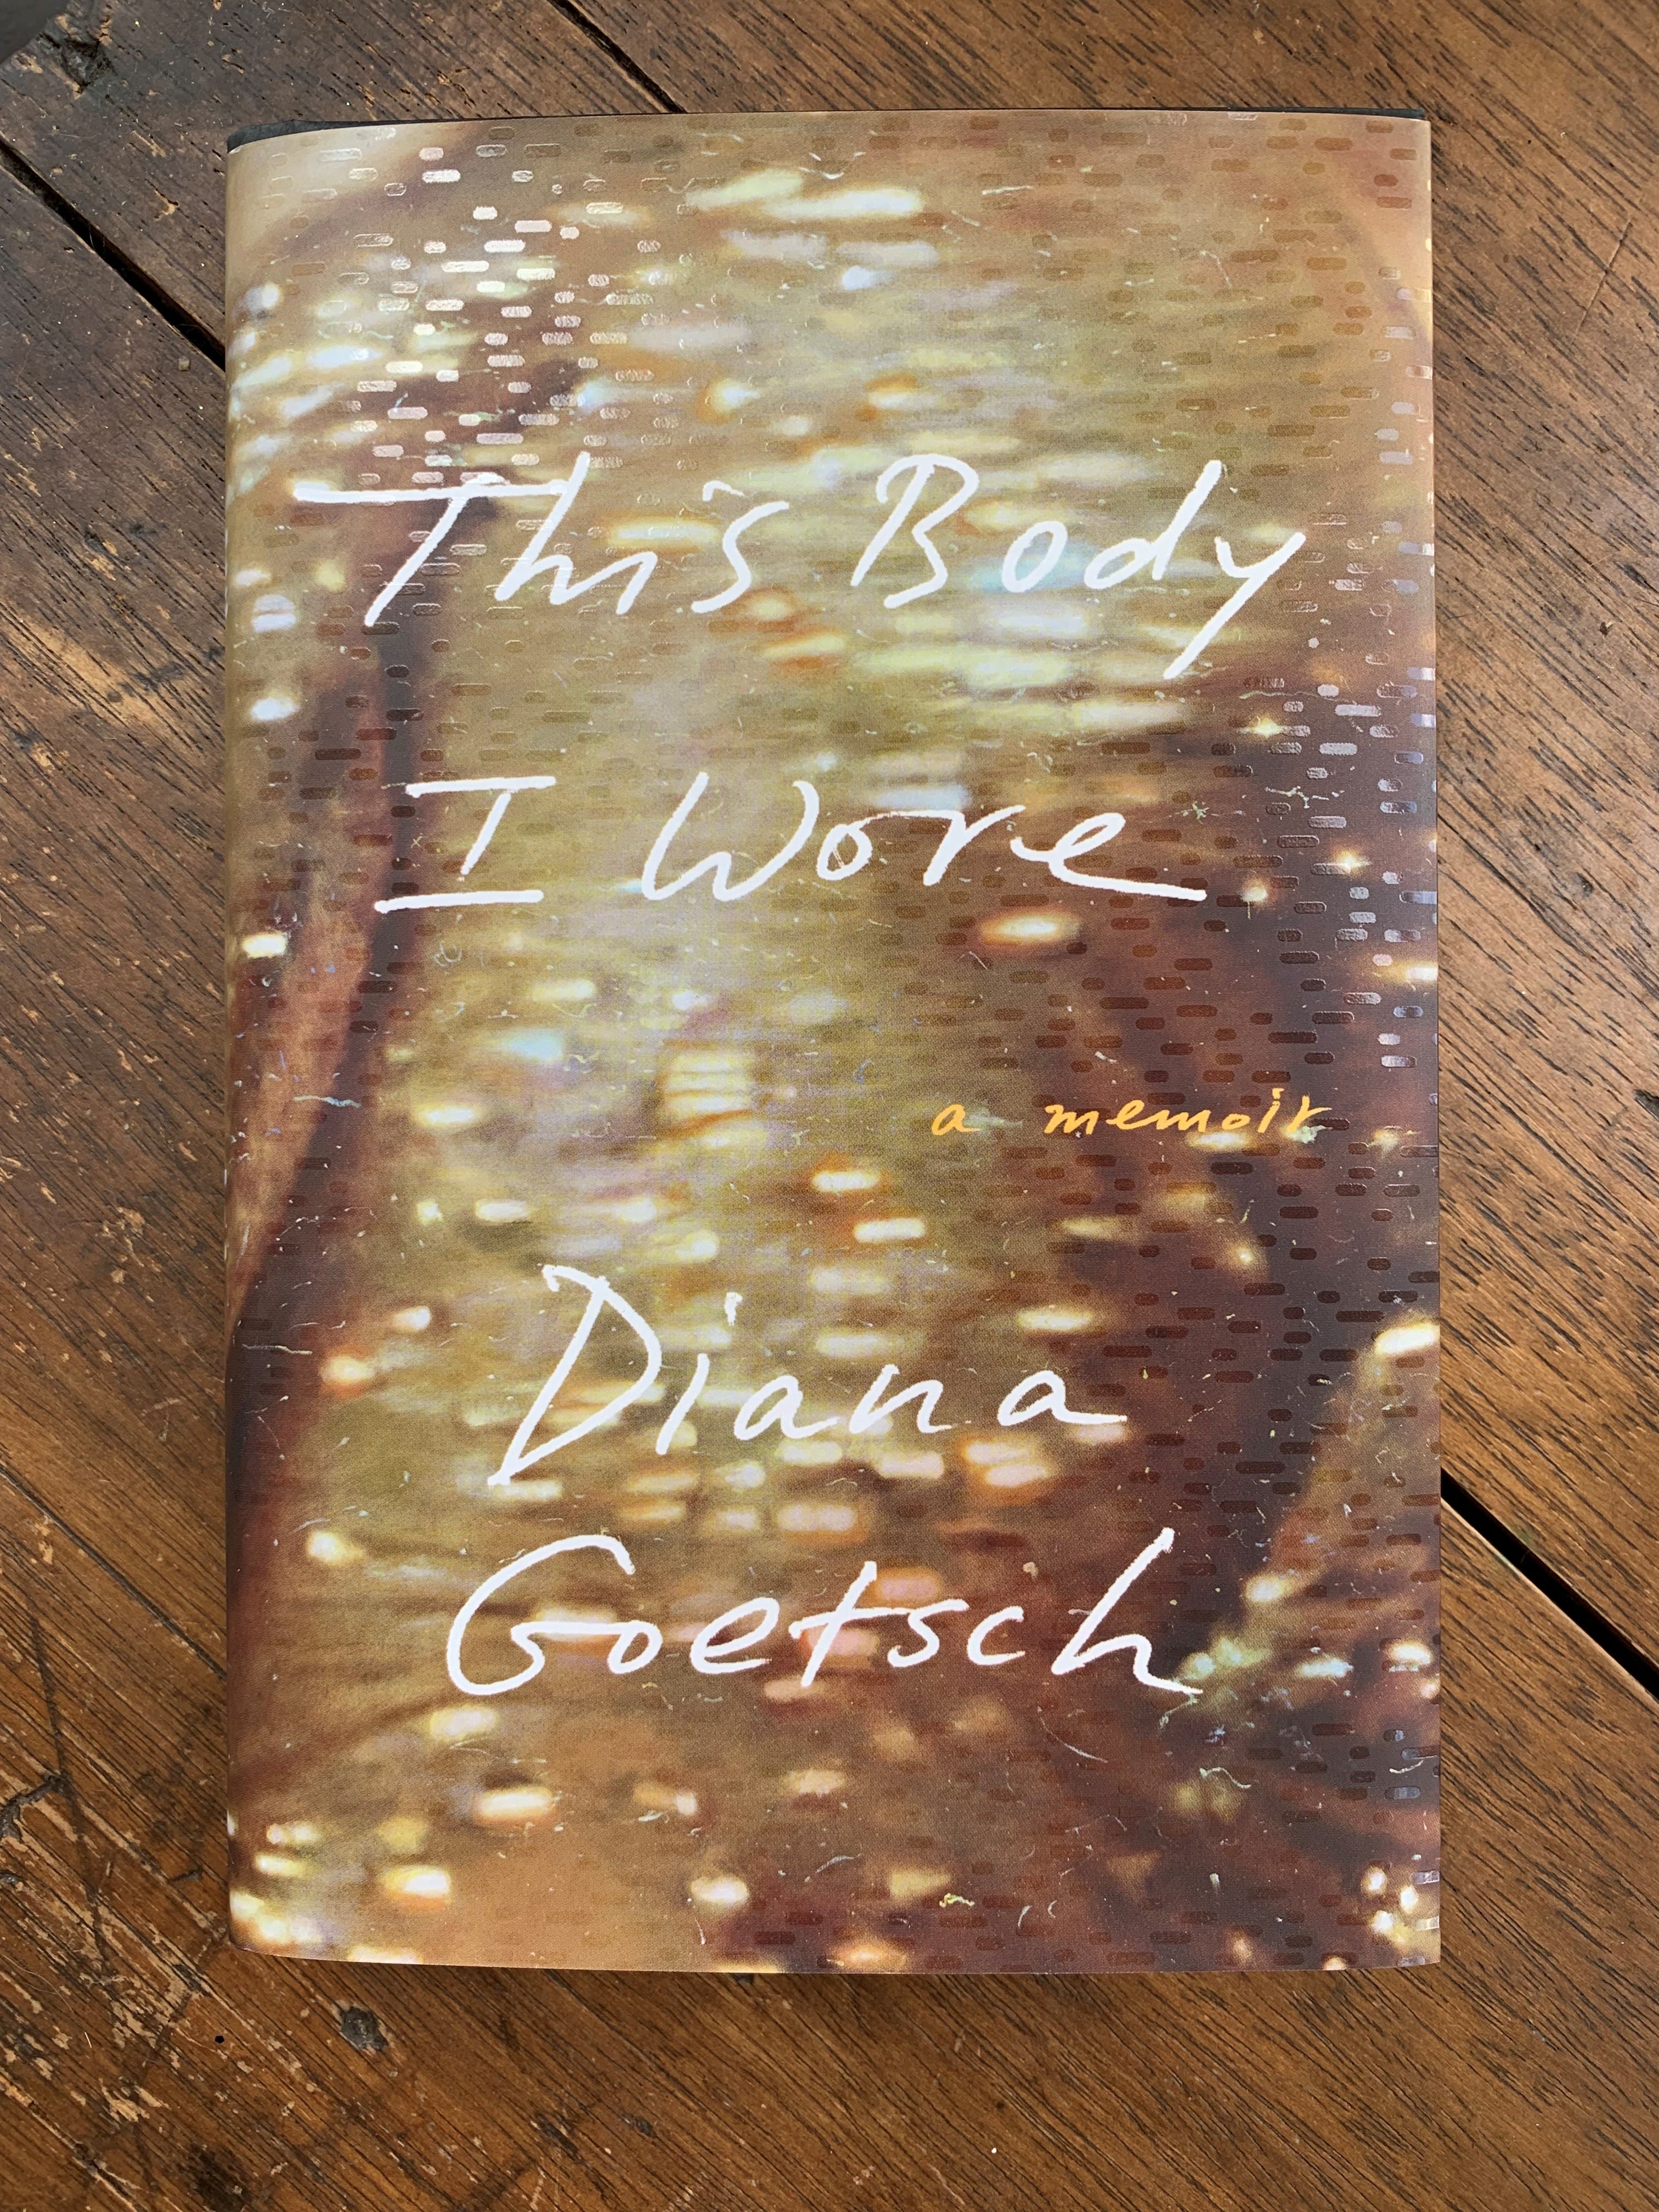 'This Body I Wore' is a memoir by Diana Goetsch, a New York City writer, poet and educator. (2022, Farrar, Straus and Giroux)